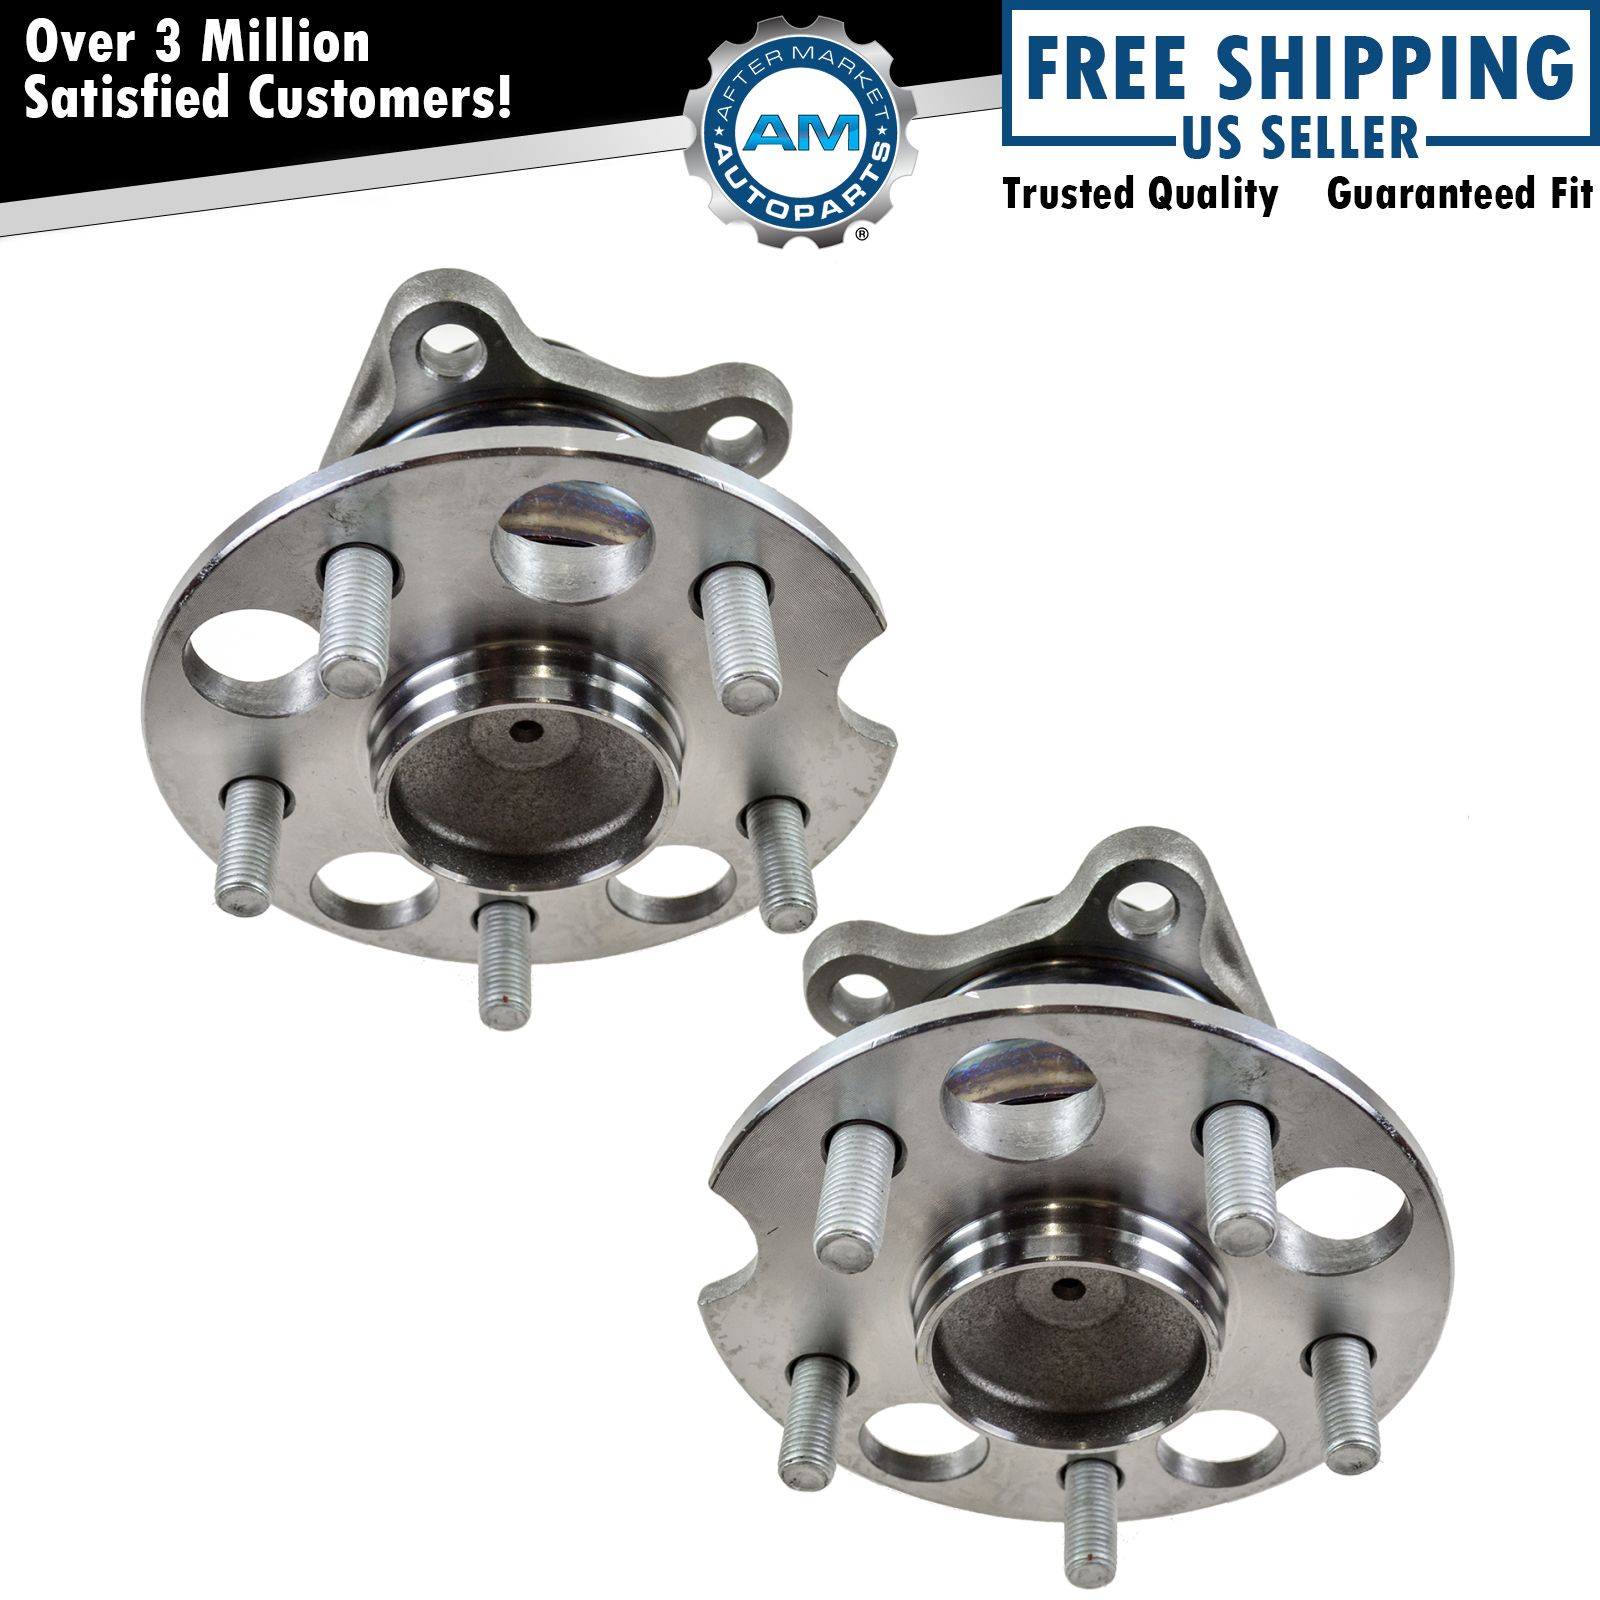 Set (2) New REAR Wheel Hub and Bearing Assembly for Highlander RX330 FWD w/ ABS